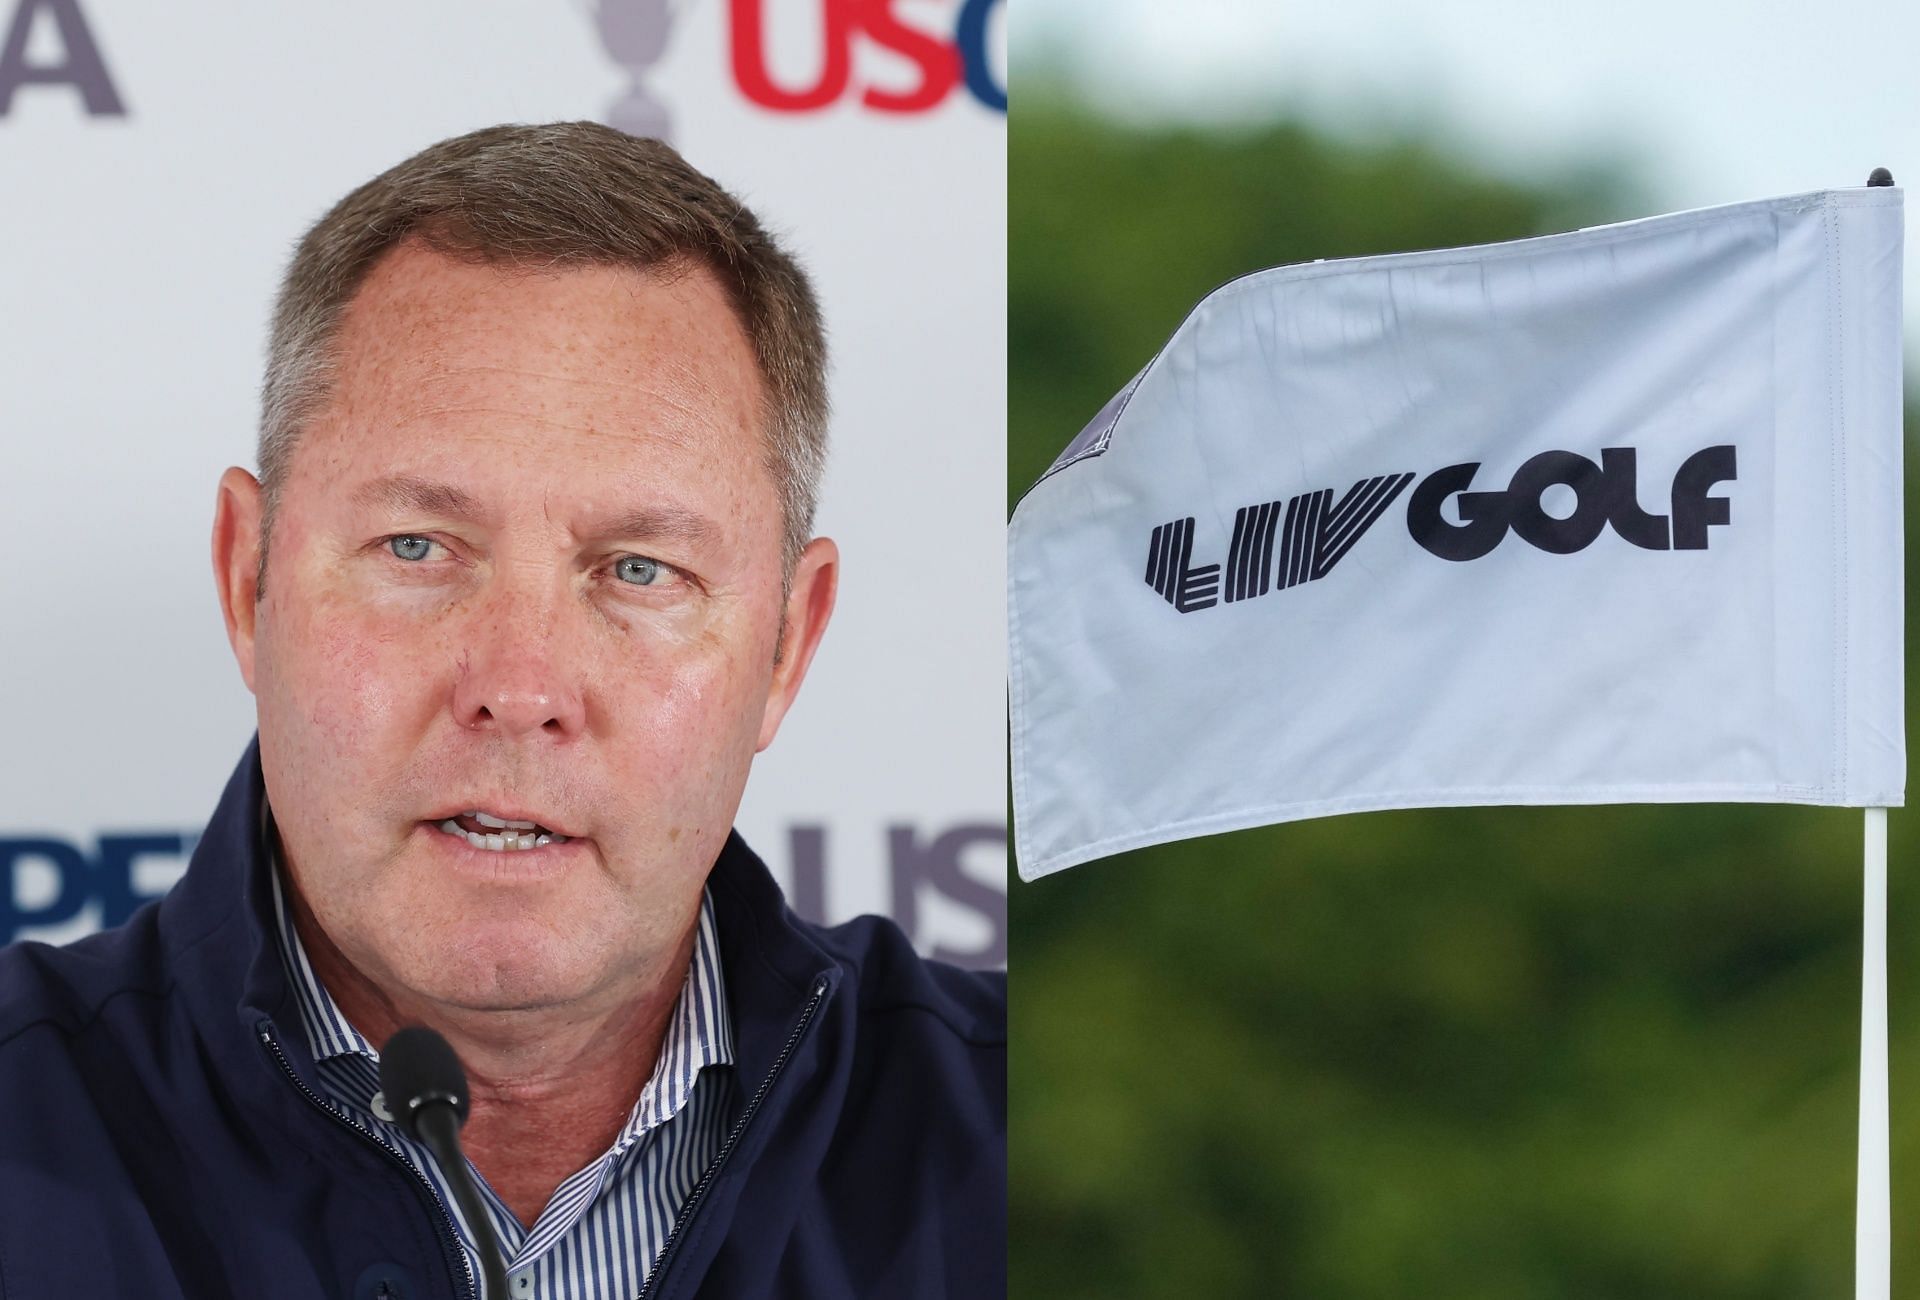 Mike Whan on LIV Golfers at U.S. Open